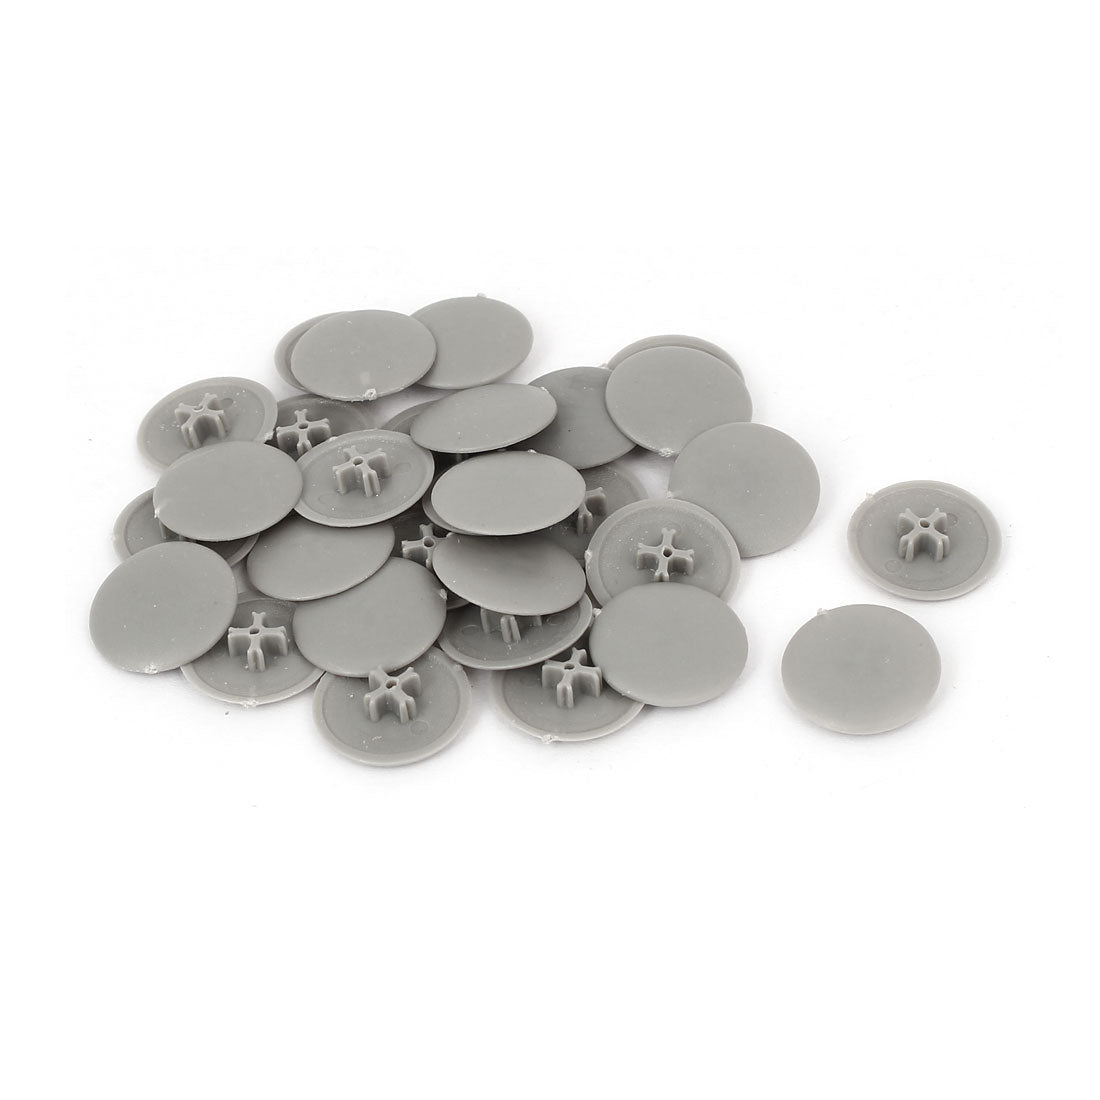 uxcell Uxcell 17mm x 4mm Plastic Round Phillips Screw Cap Cross Head Cover Gray 30pcs